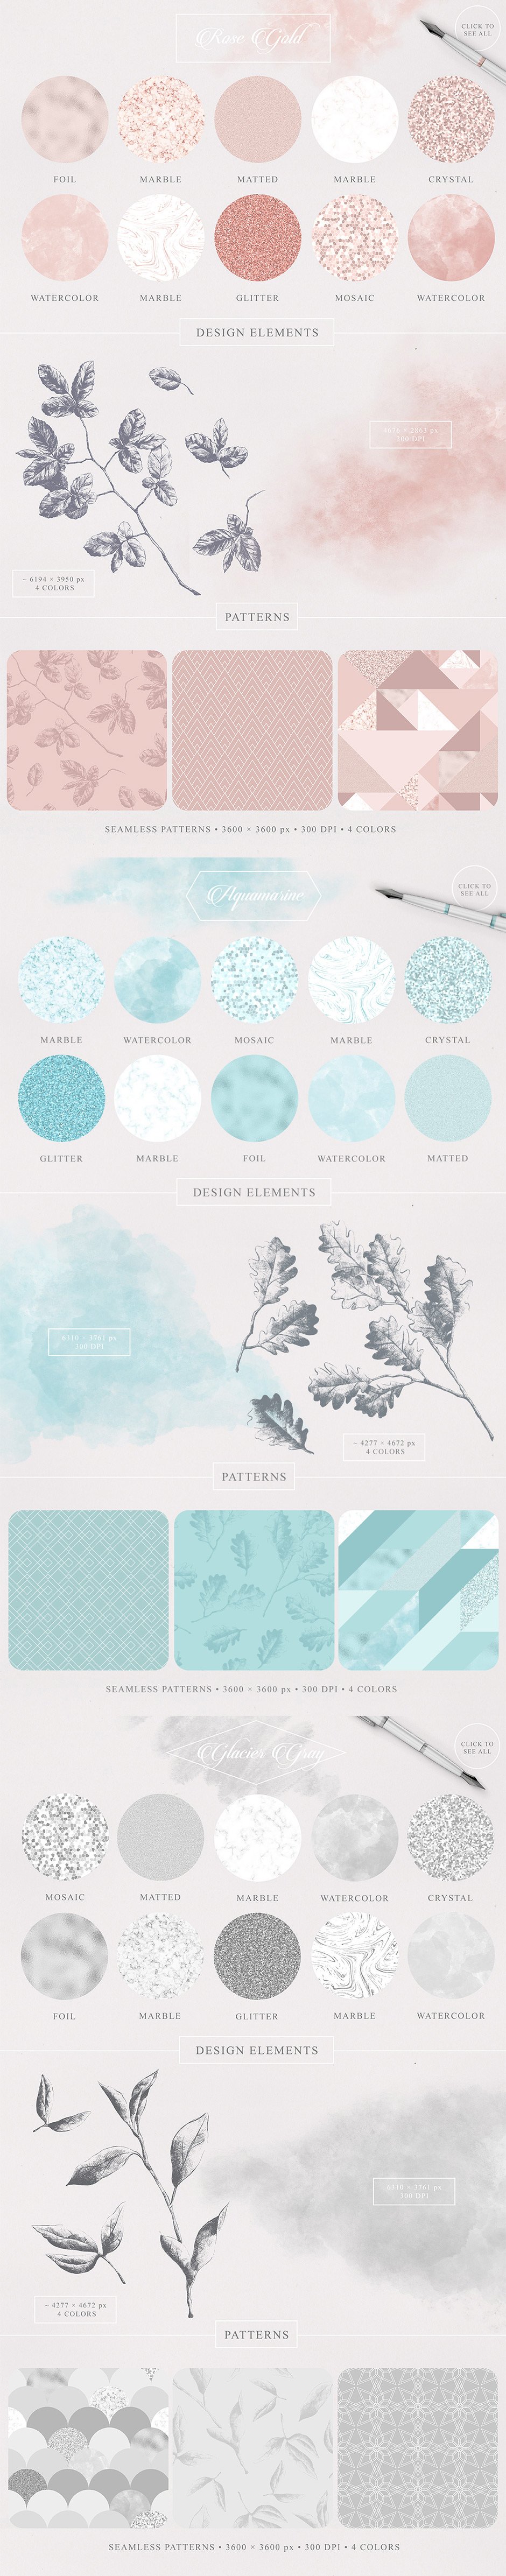 Elegant Textures, Elements and Patterns Toolkit